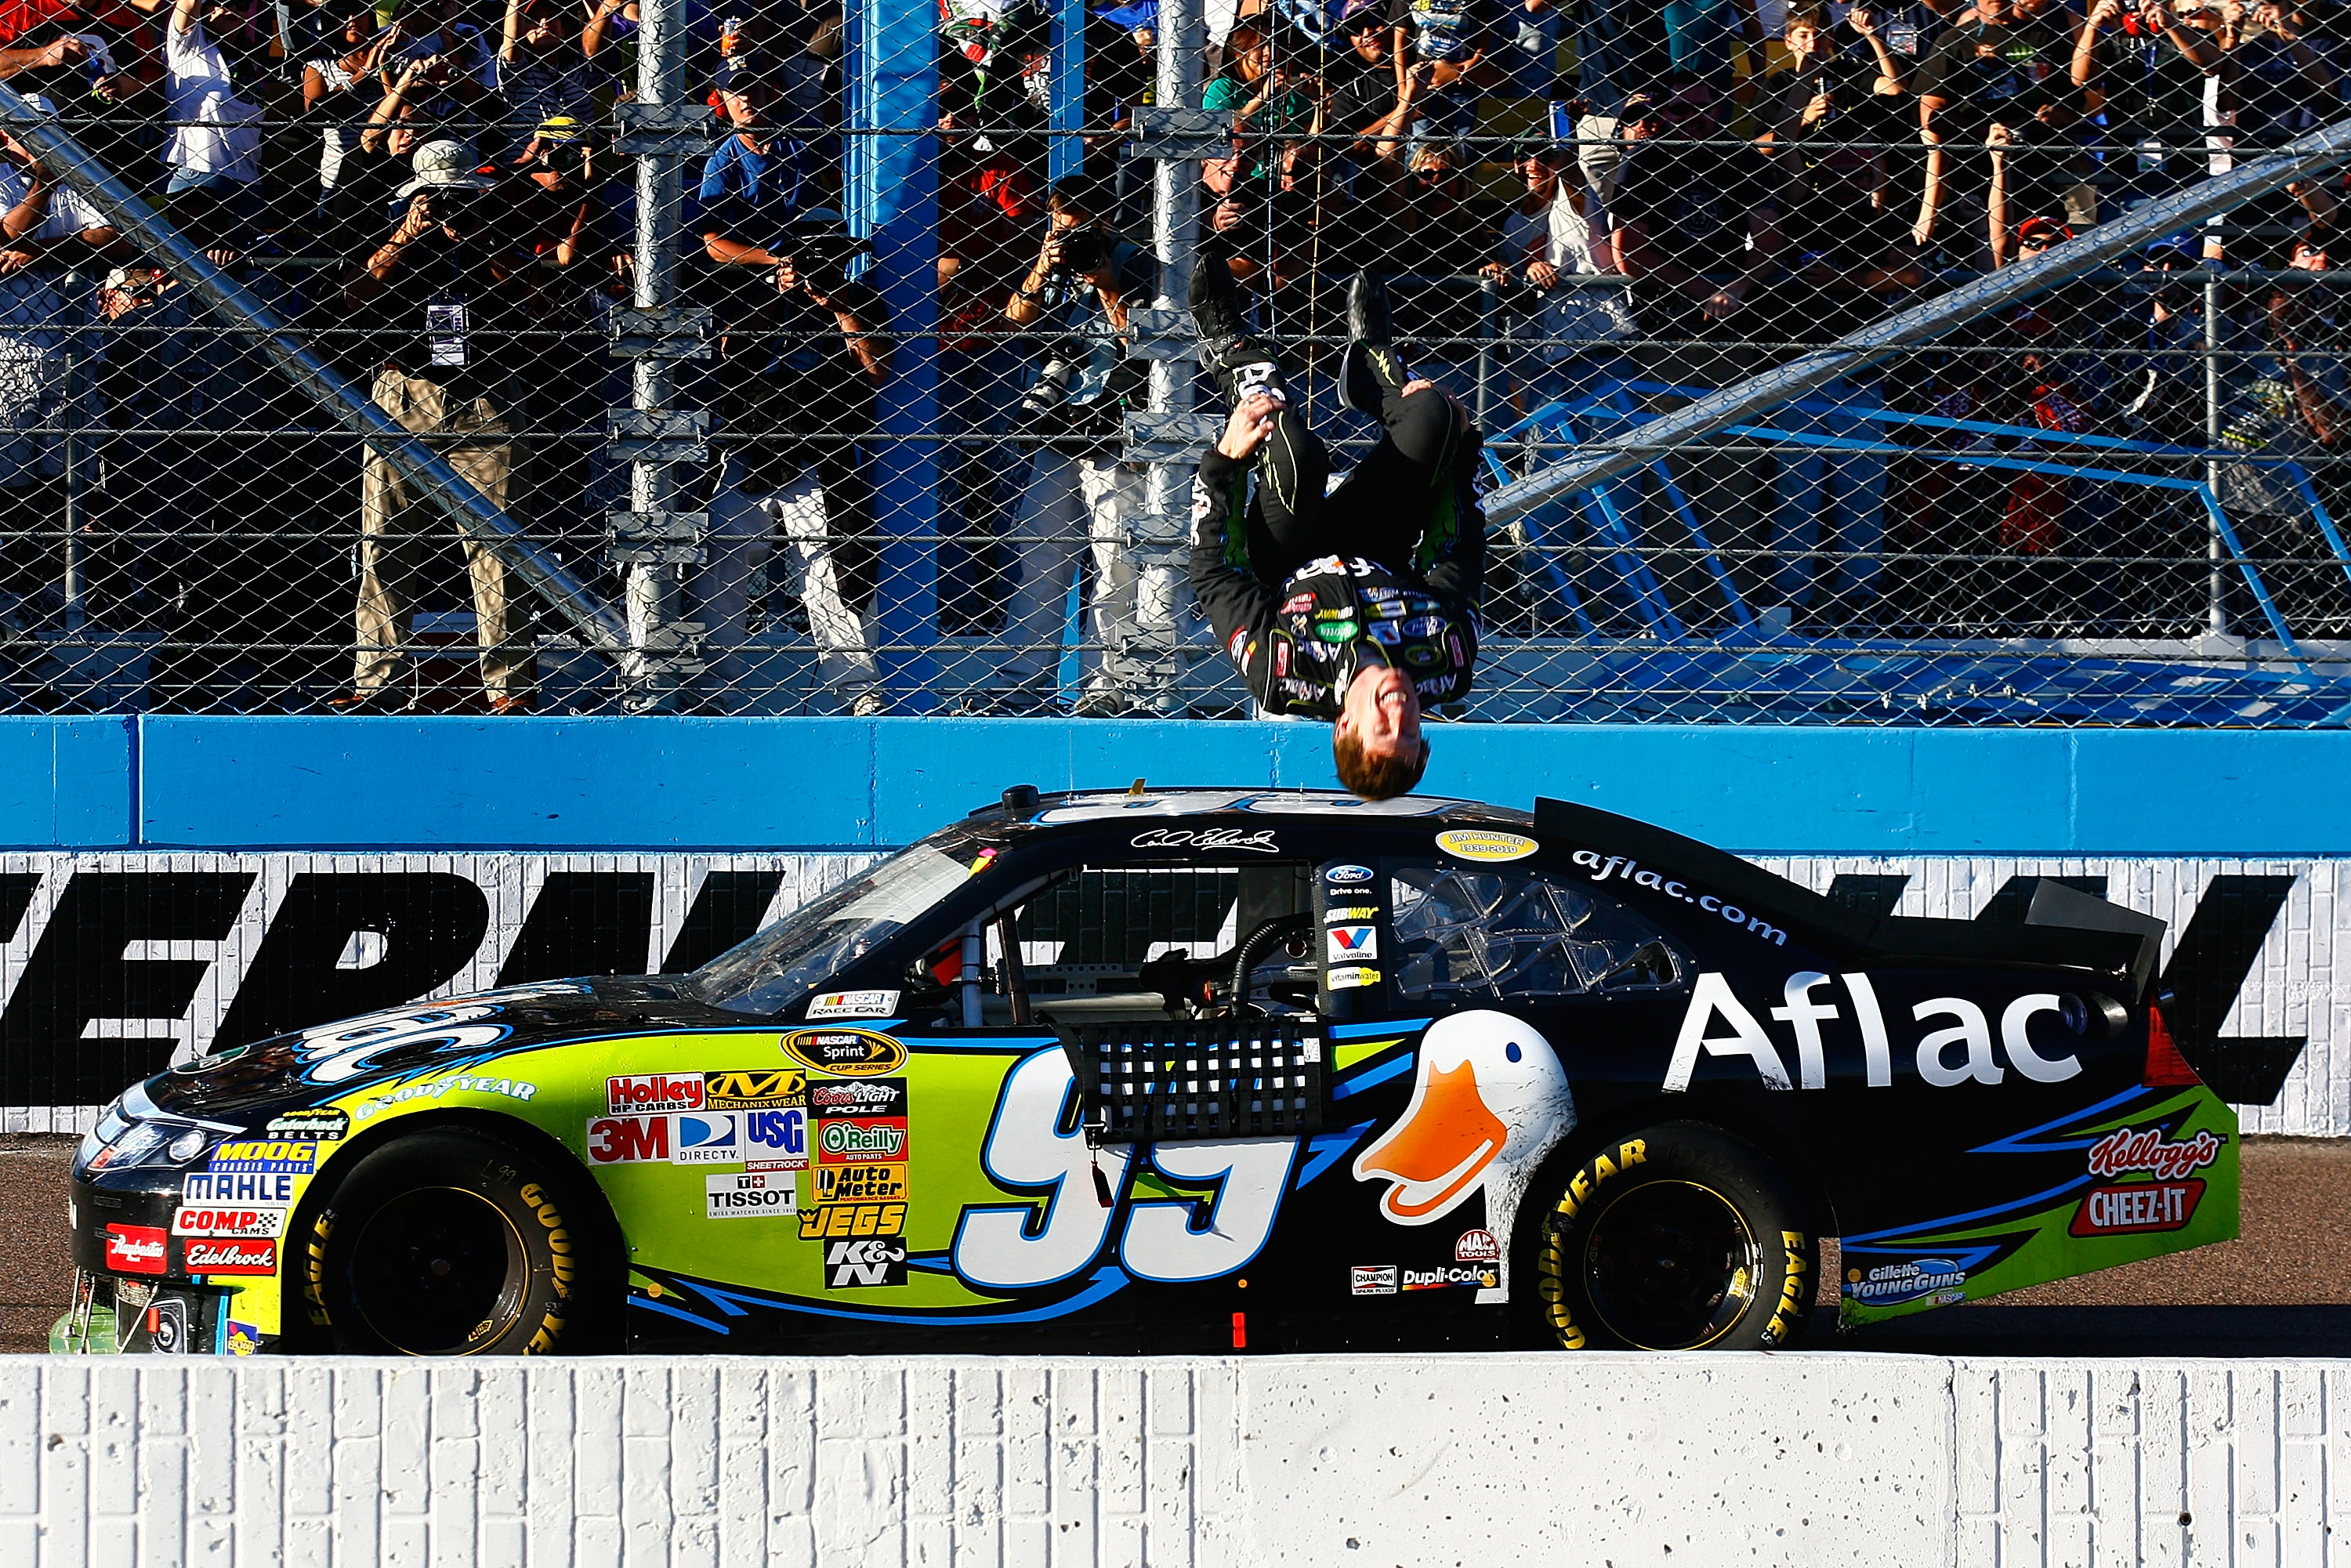 AVONDALE, AZ - NOVEMBER 14:  Carl Edwards, driver of the #99 Aflac Ford, performs a backflip after winning the NASCAR Sprint Cup Series Kobalt Tools 500 at Phoenix International Raceway on November 14, 2010 in Avondale, Arizona.  (Photo by Jason Smith/Get